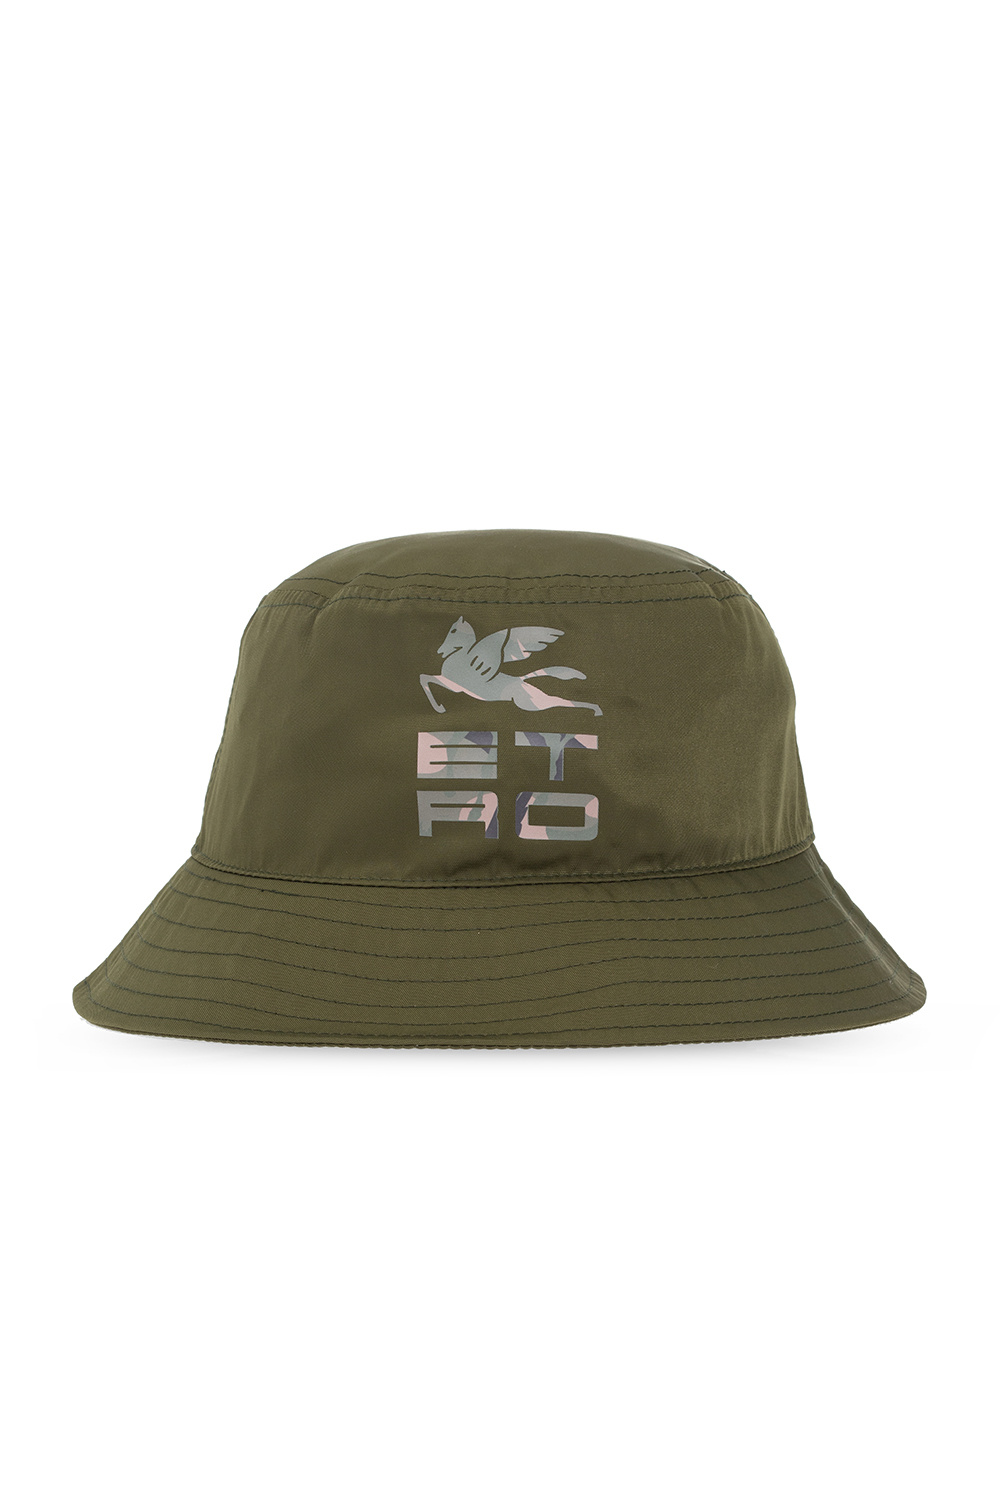 Etro Legacy Athletic Creighton Bluejays CP Patch Hat